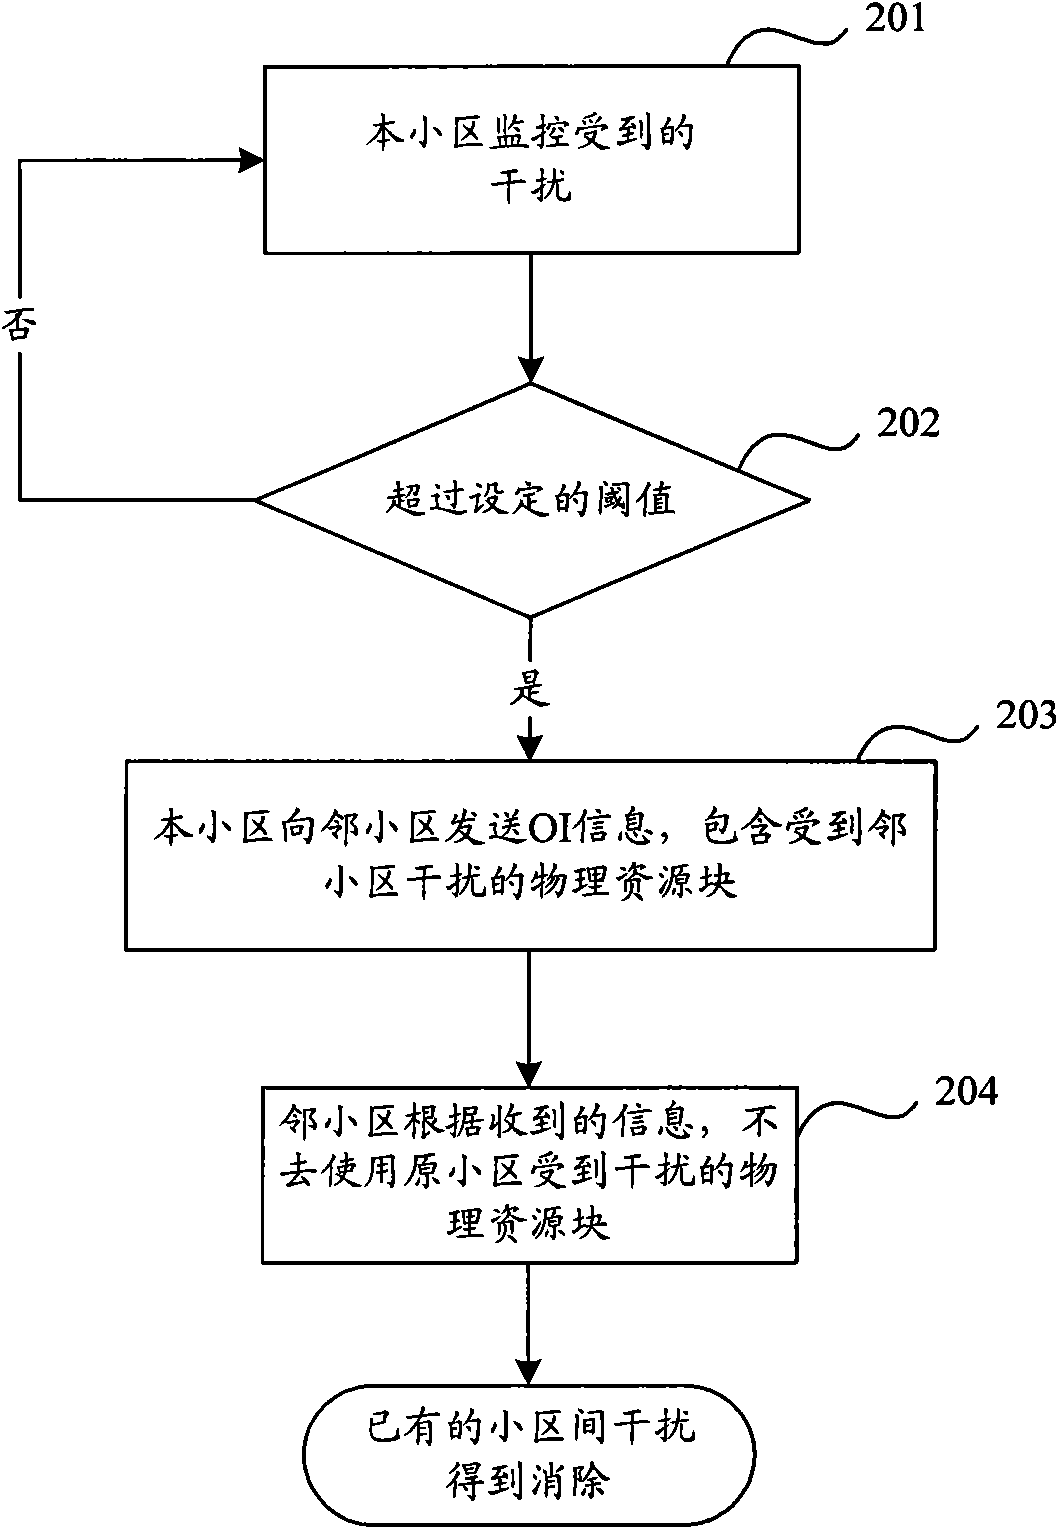 Method, device and system for eliminating interference among cells